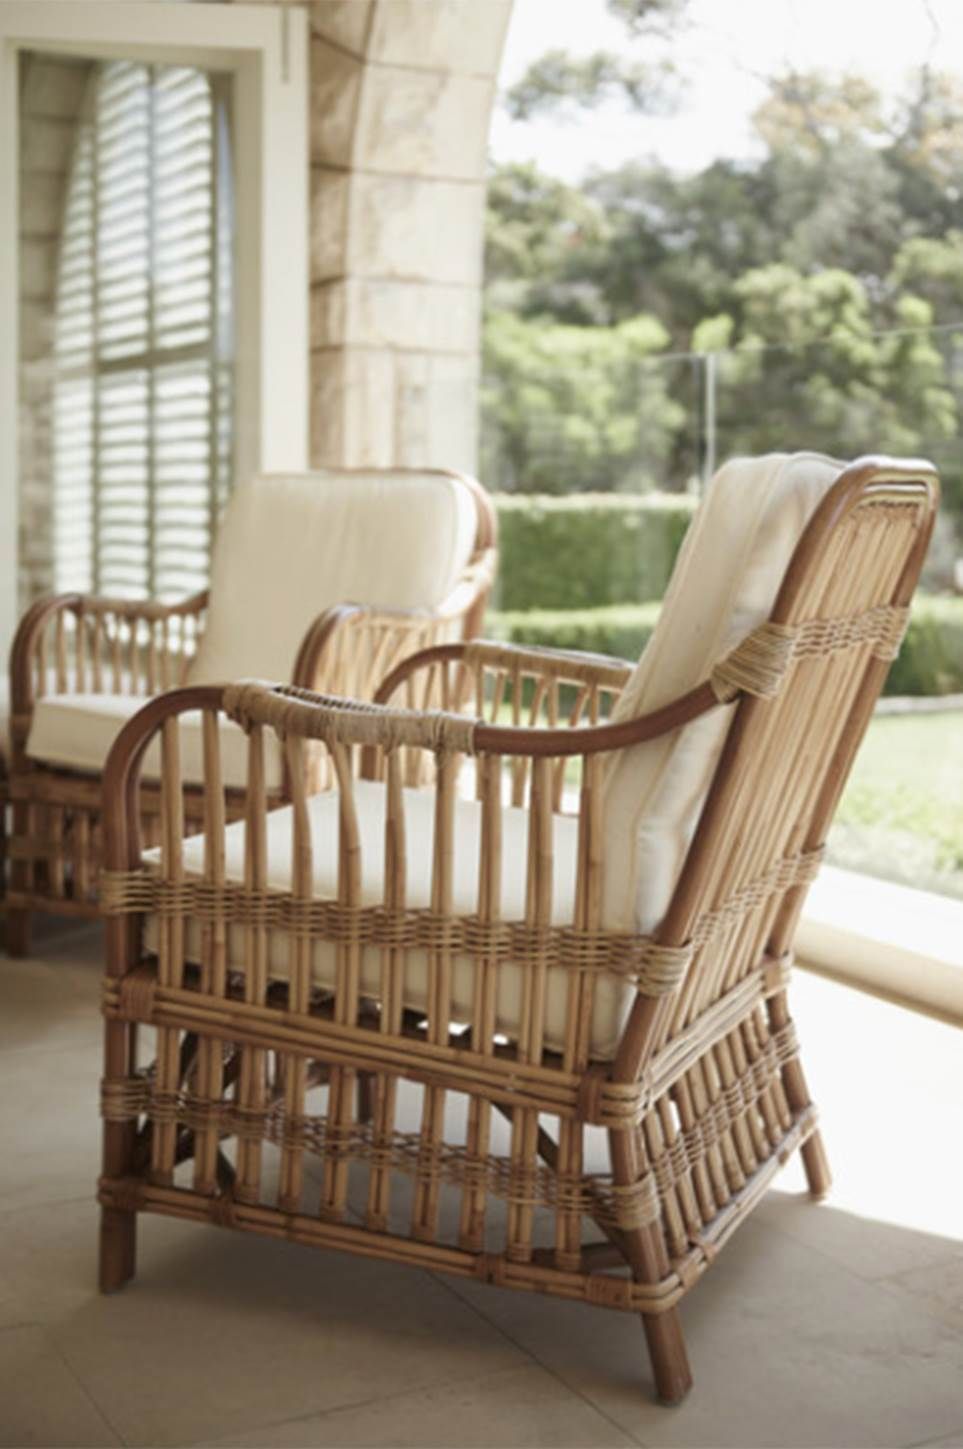 Enhance Your Patio Decor with Rattan
Outdoor Furniture